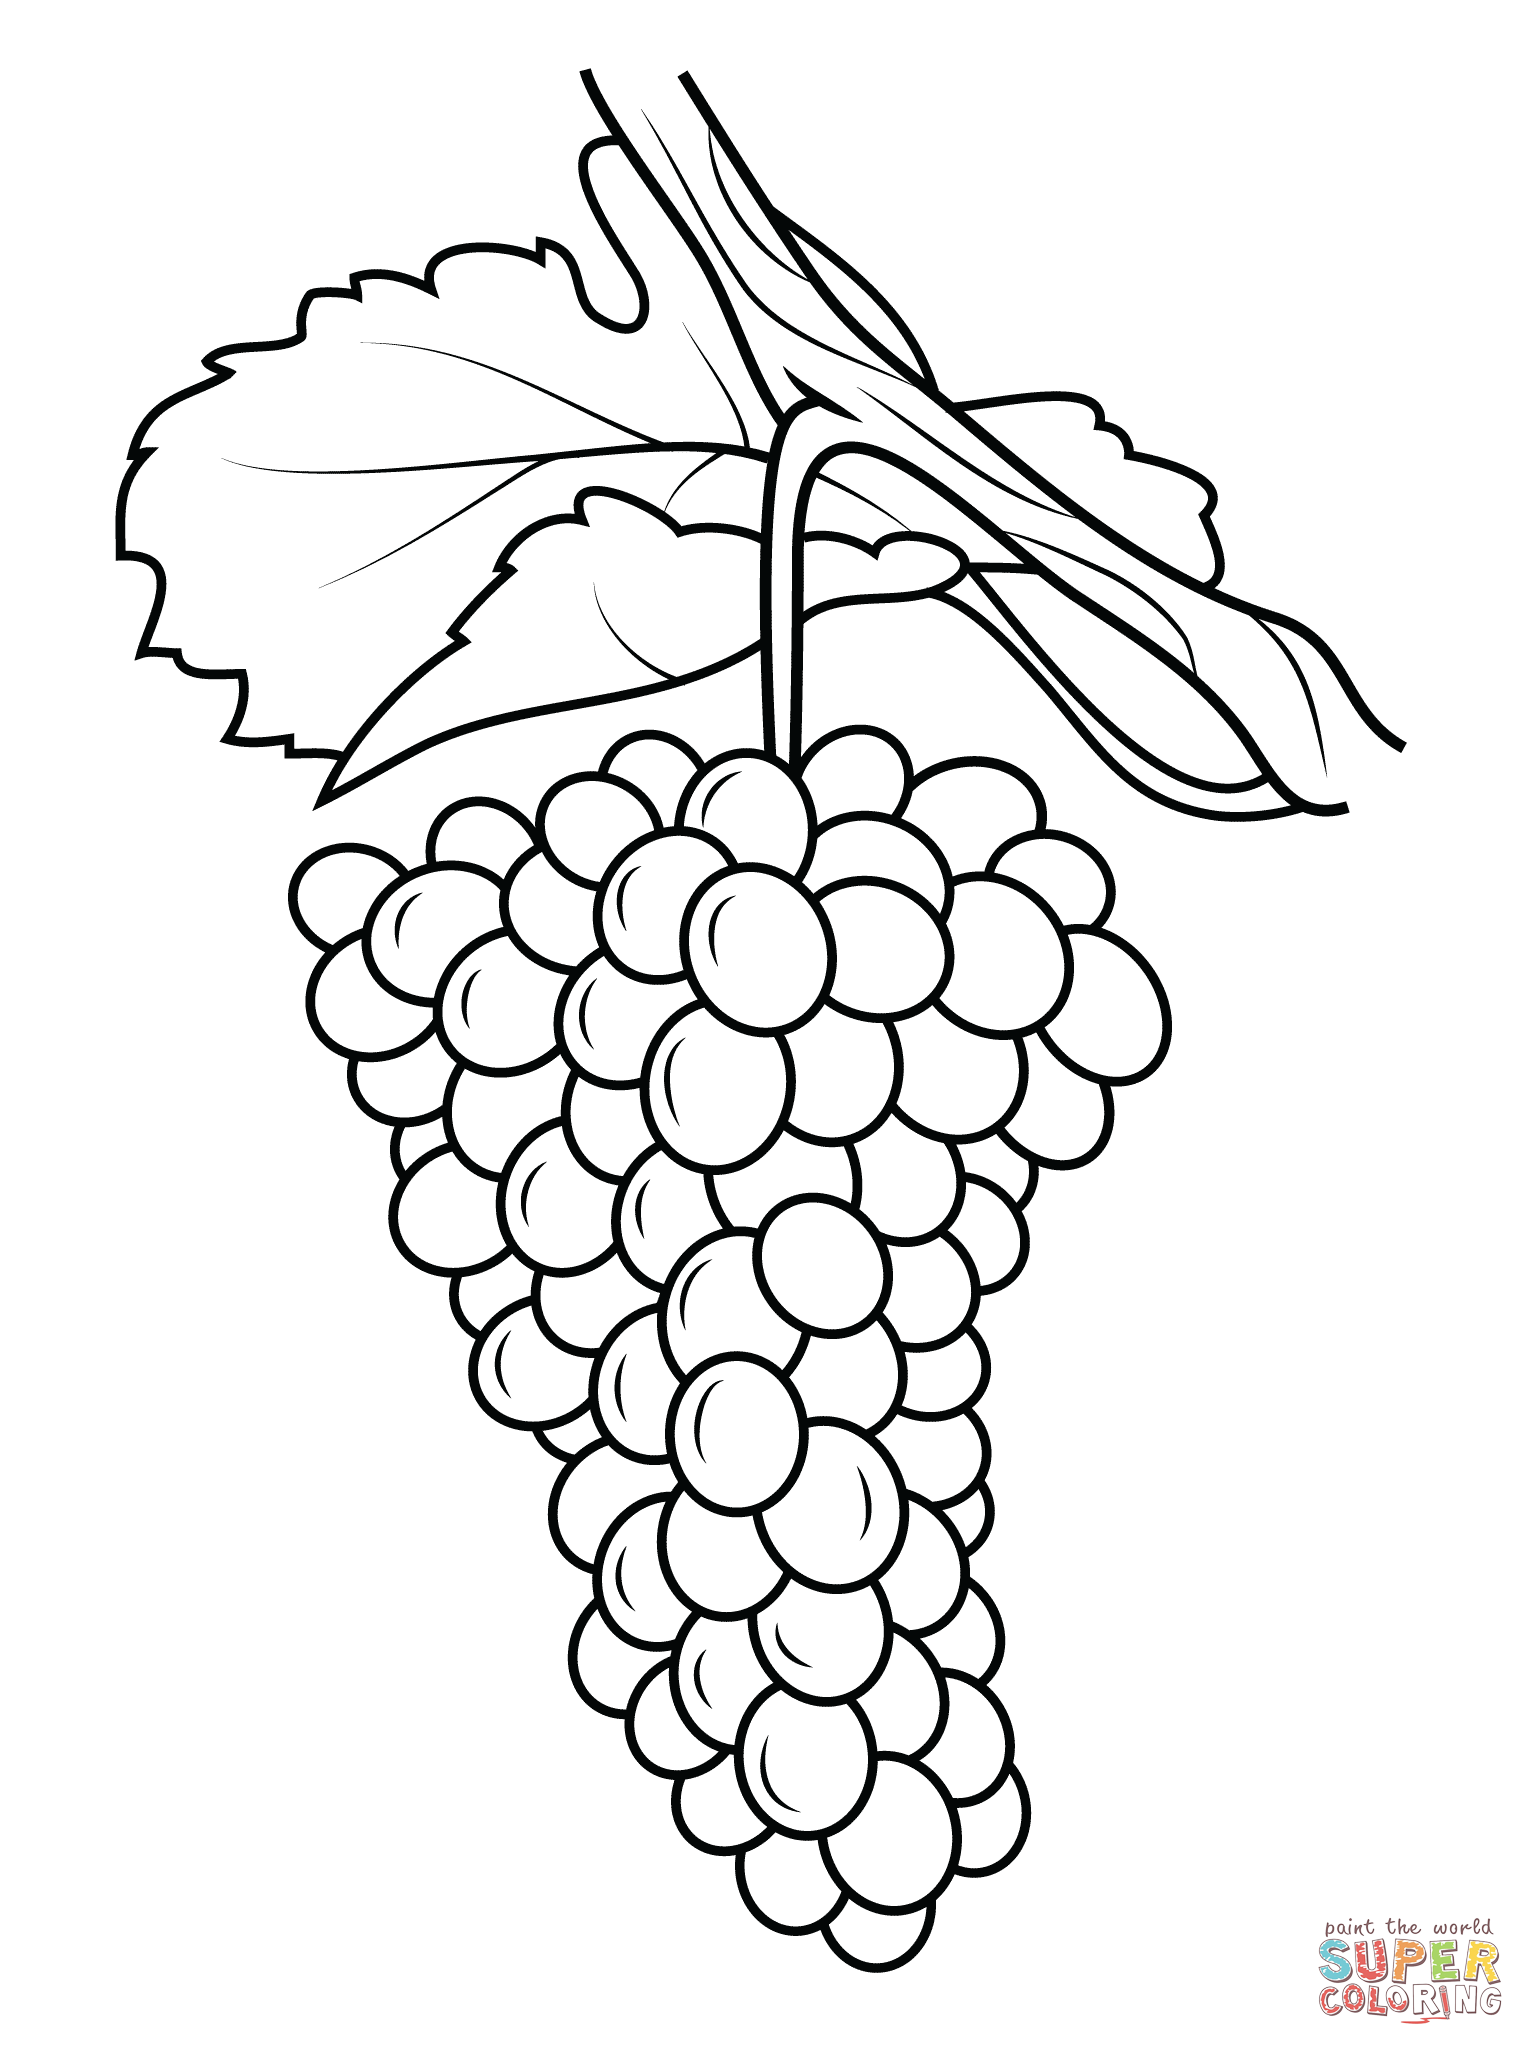 Grapes coloring pages | Free Coloring Pages